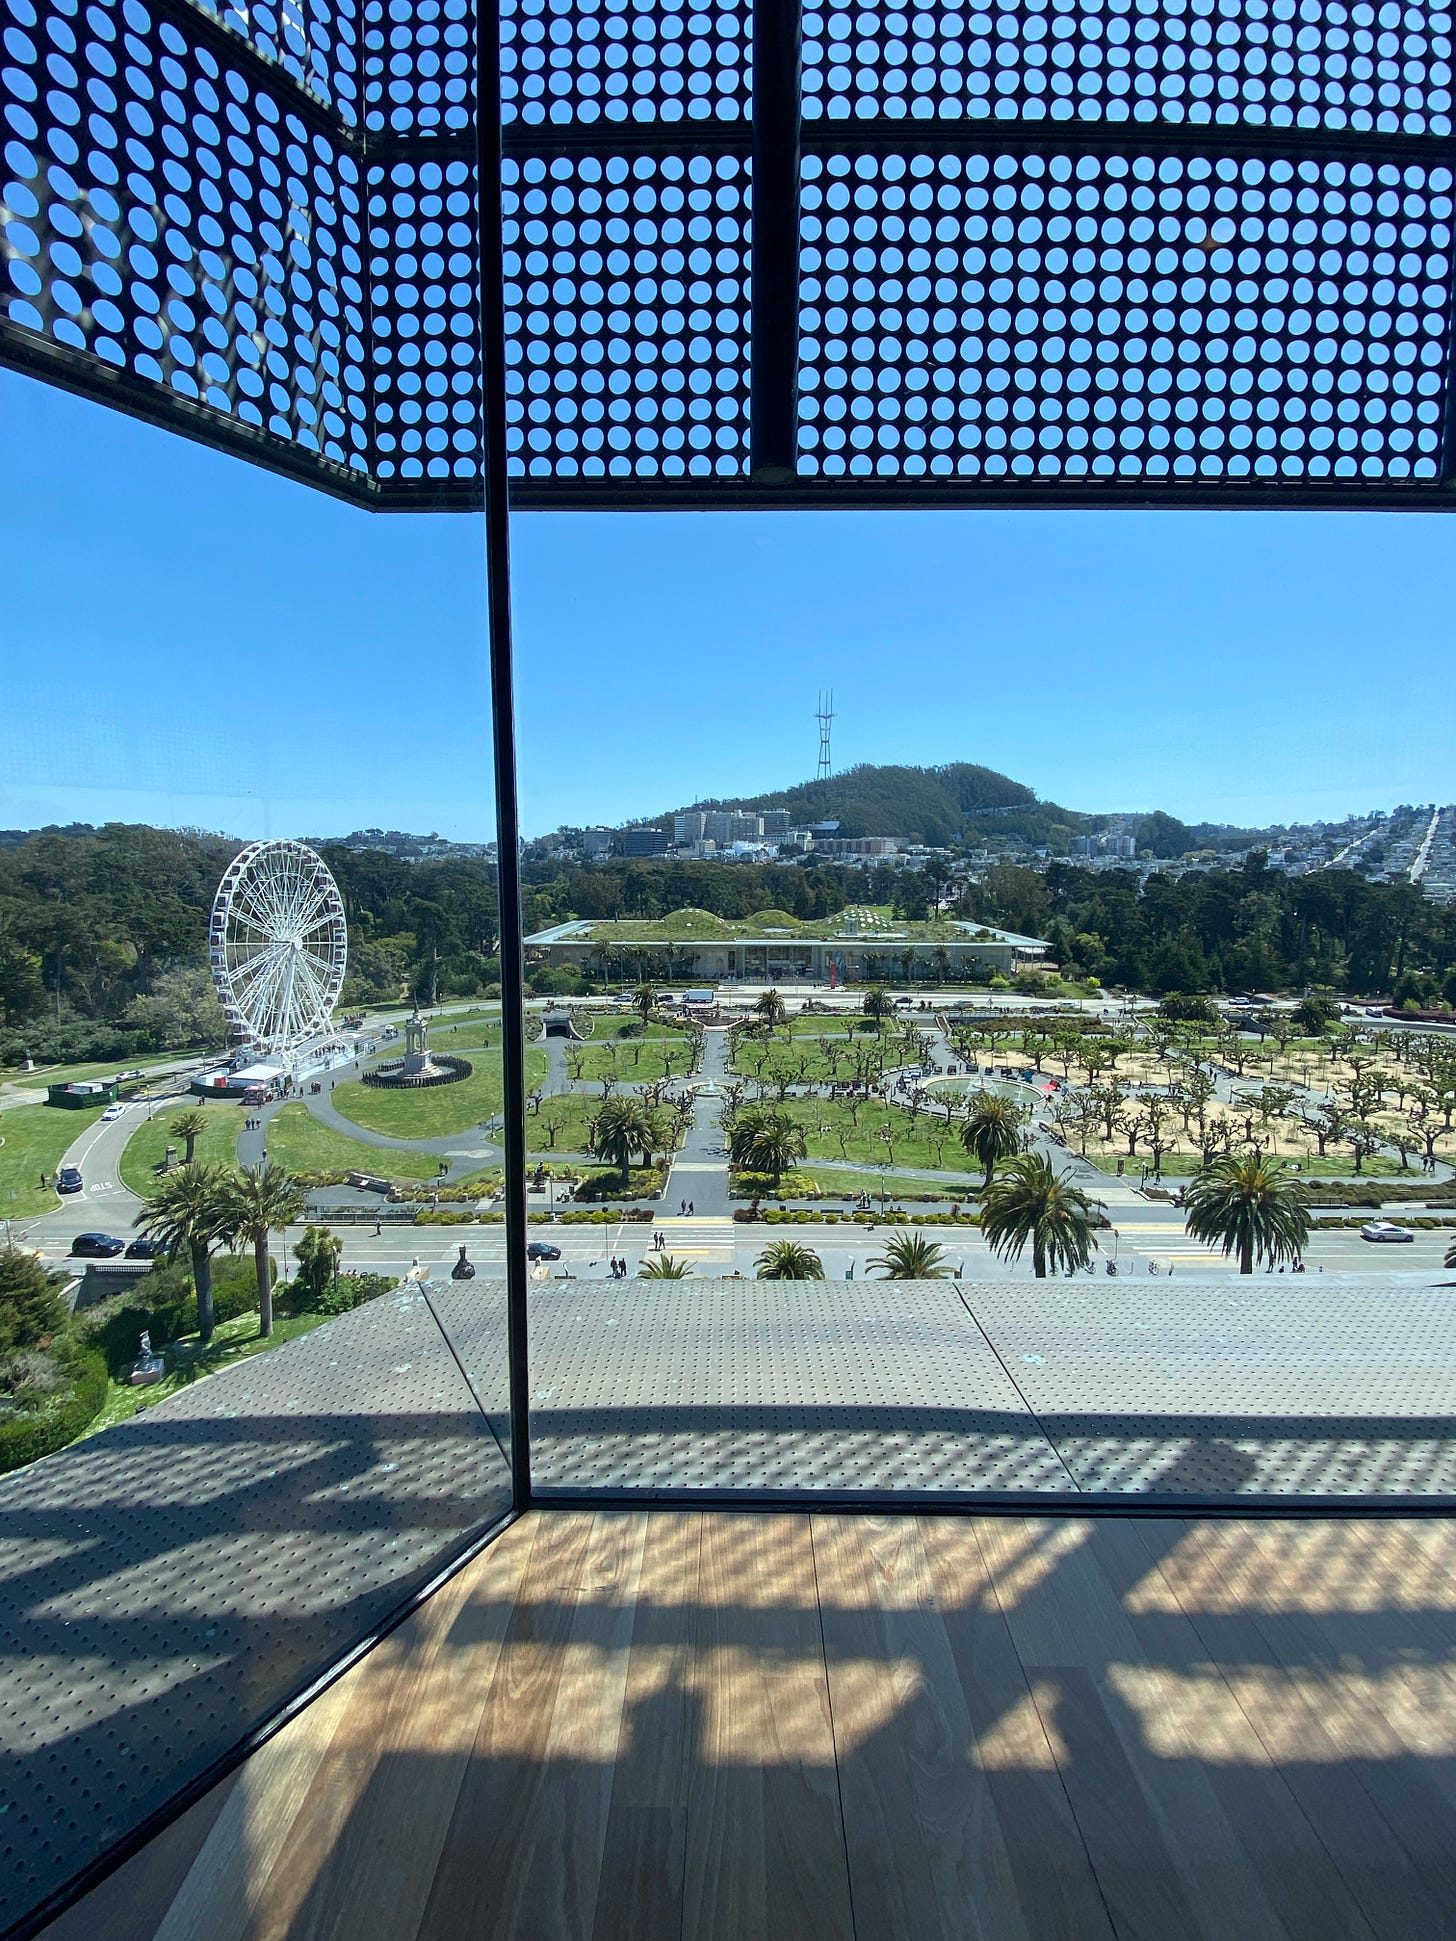 The de Young Museum Hamon Observation Deck San Francisco Brian Madden First Friday Newsletter